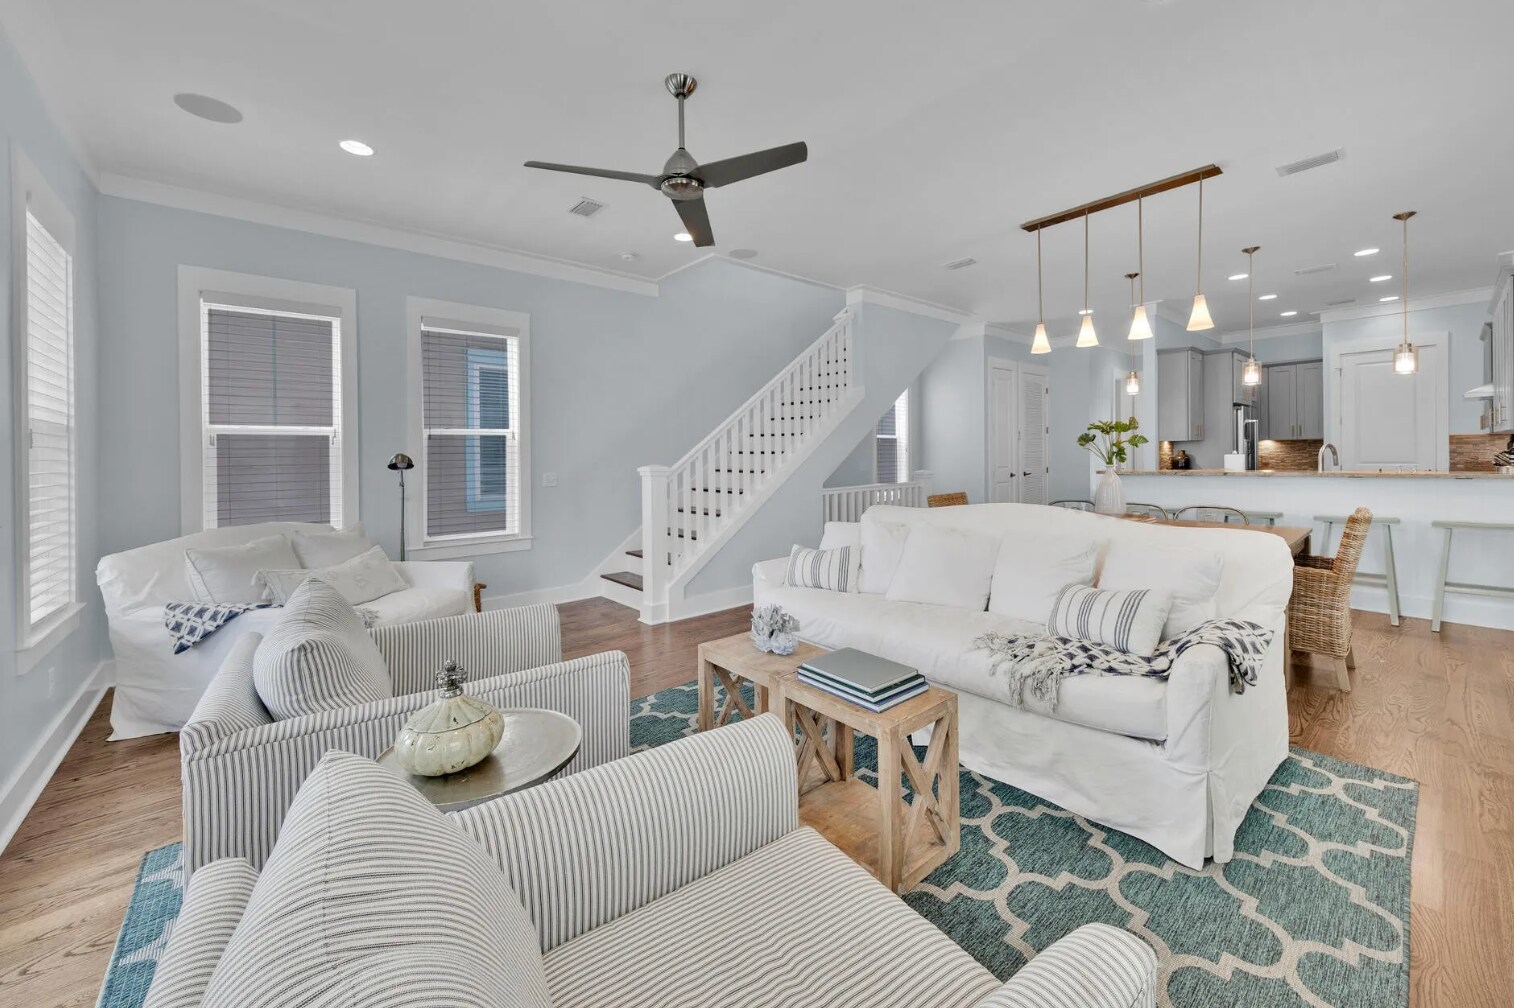 Property Image 1 - 🦩Walk-Out To 30A in Seacrest~Pet-Friendly🦩